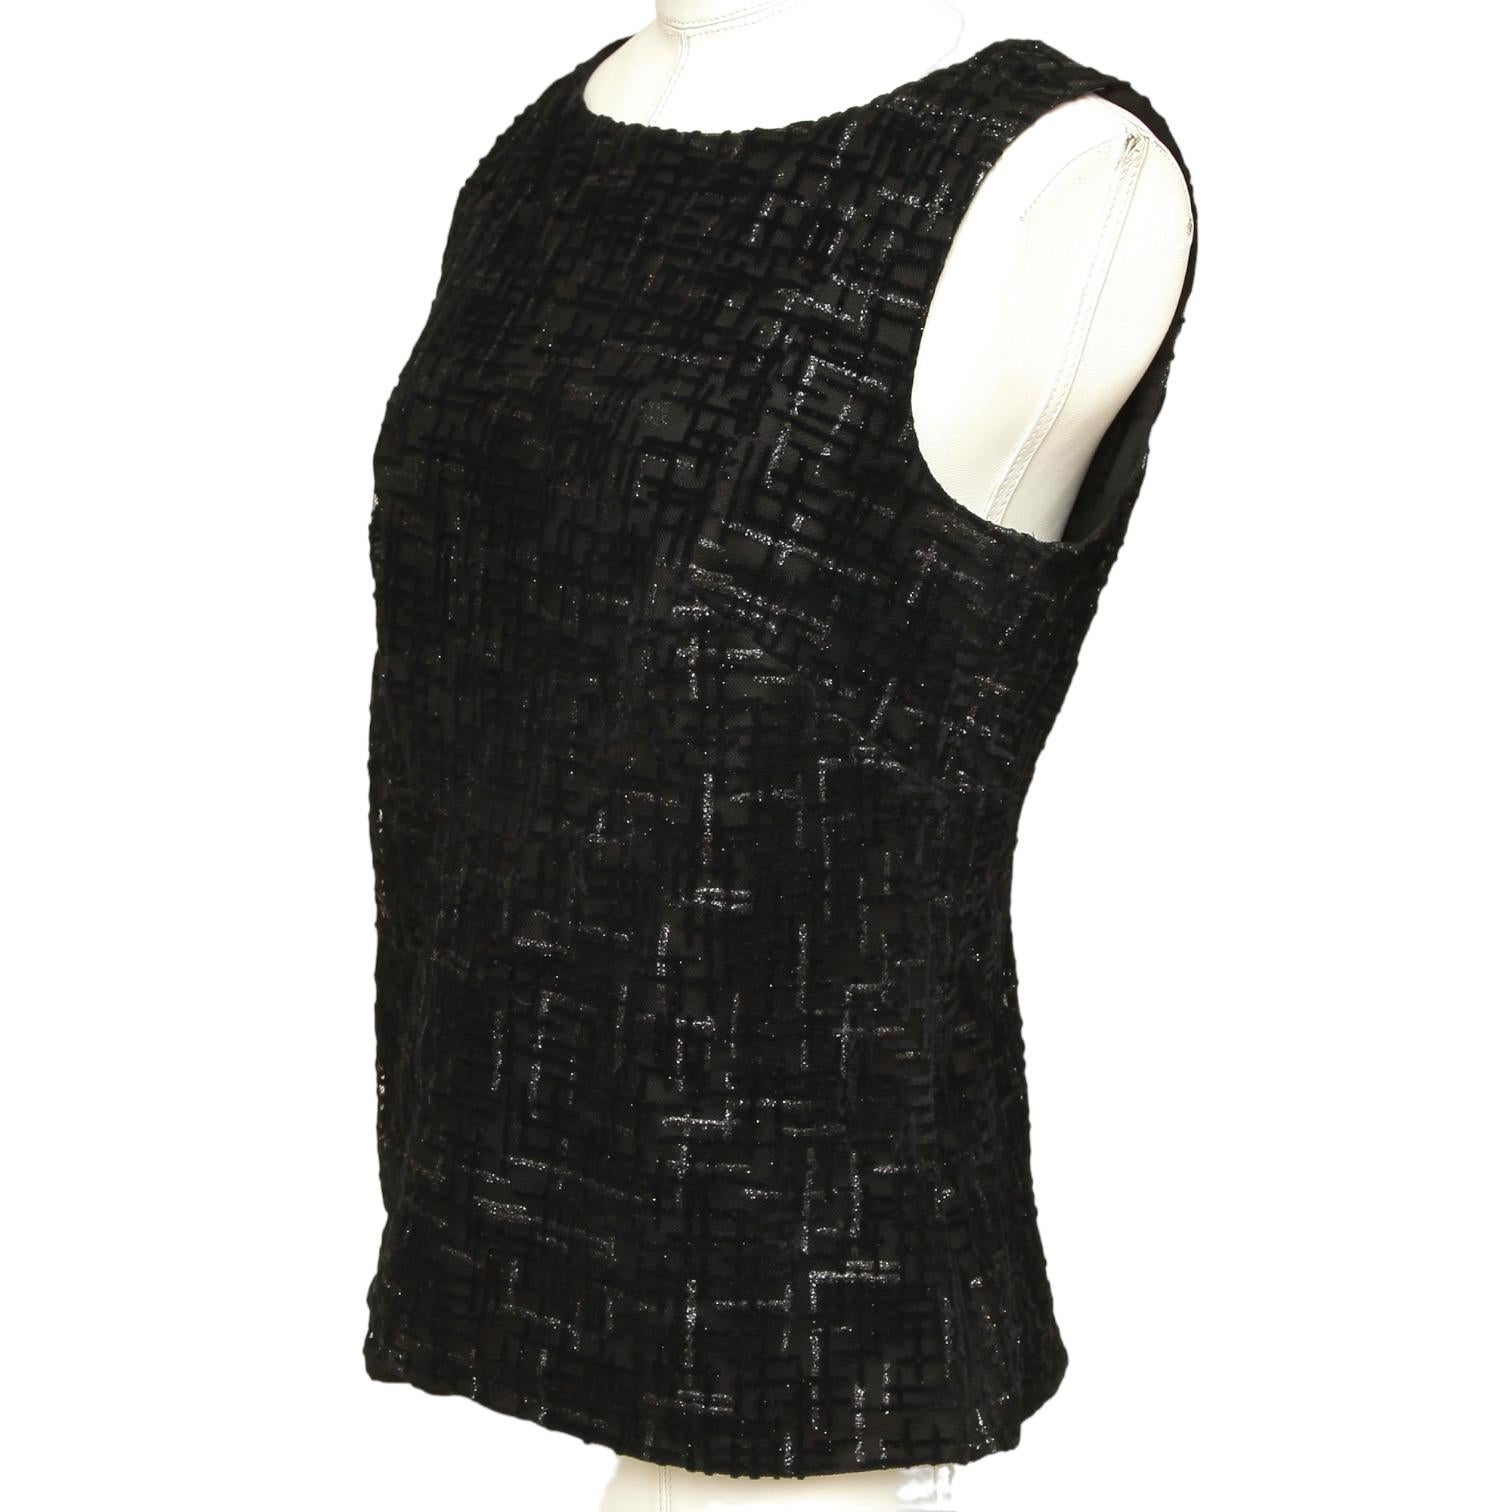 CHANEL Blouse Top Shirt Black Sleeveless CC Button Sz 34 12P 2012 NWT $2190 In New Condition For Sale In Hollywood, FL